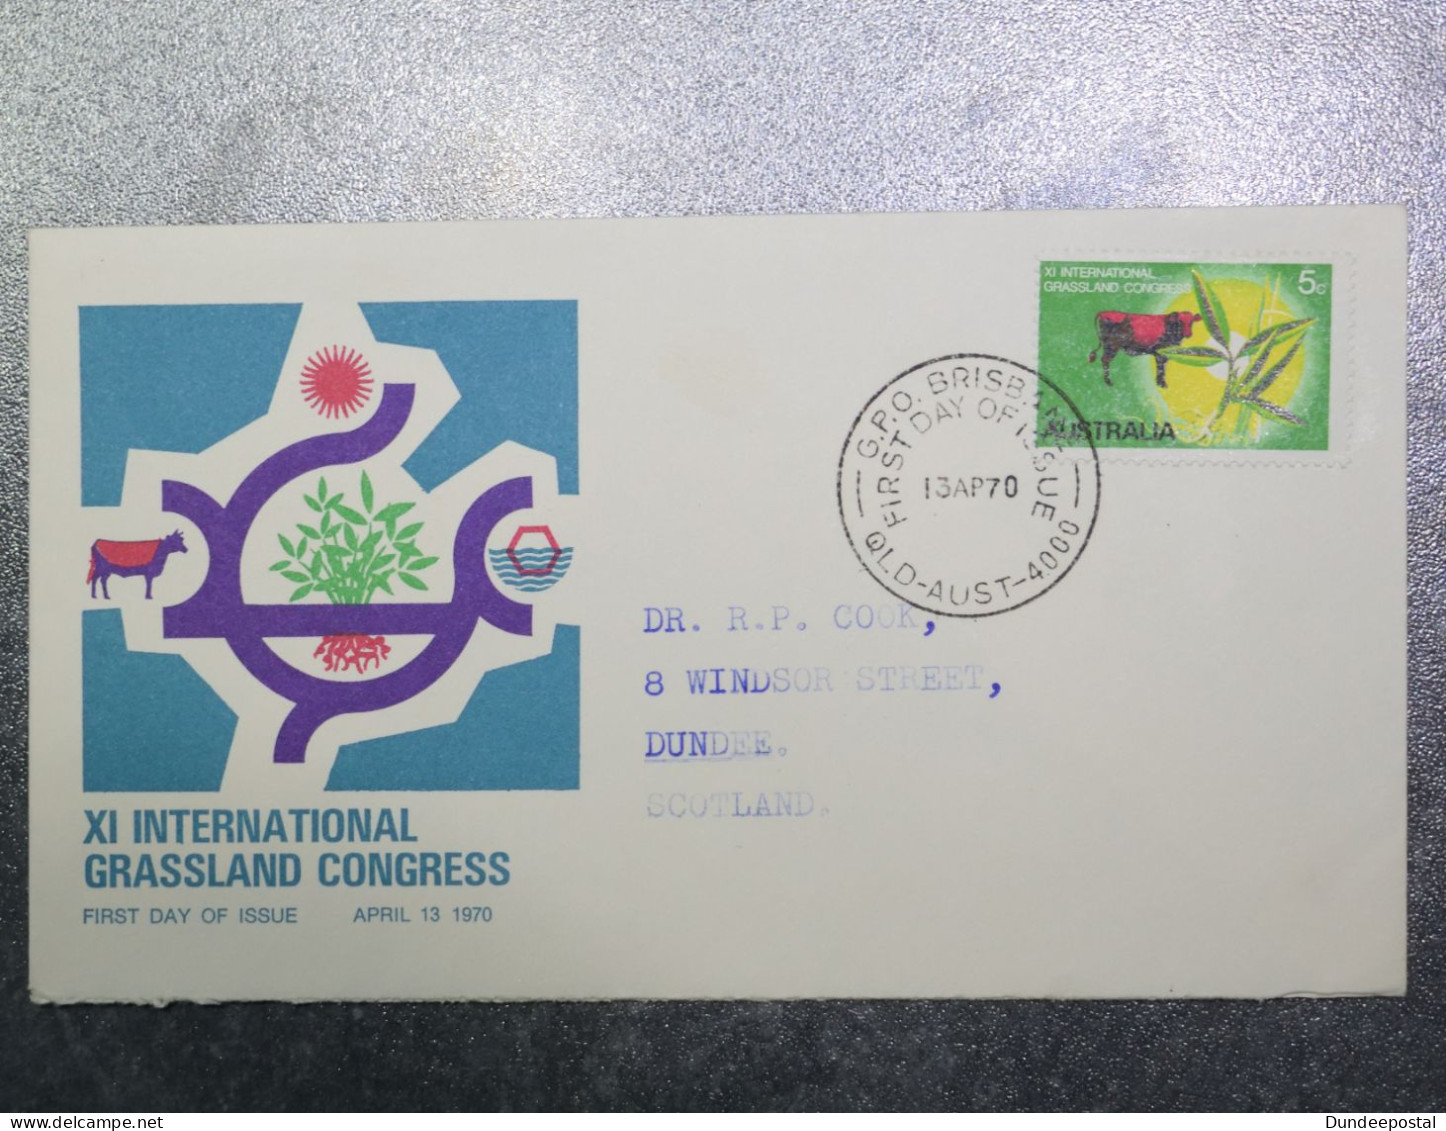 AUSTRALIA  First Day Cover Grassland Congress  1970   ~~L@@K~~ - Covers & Documents